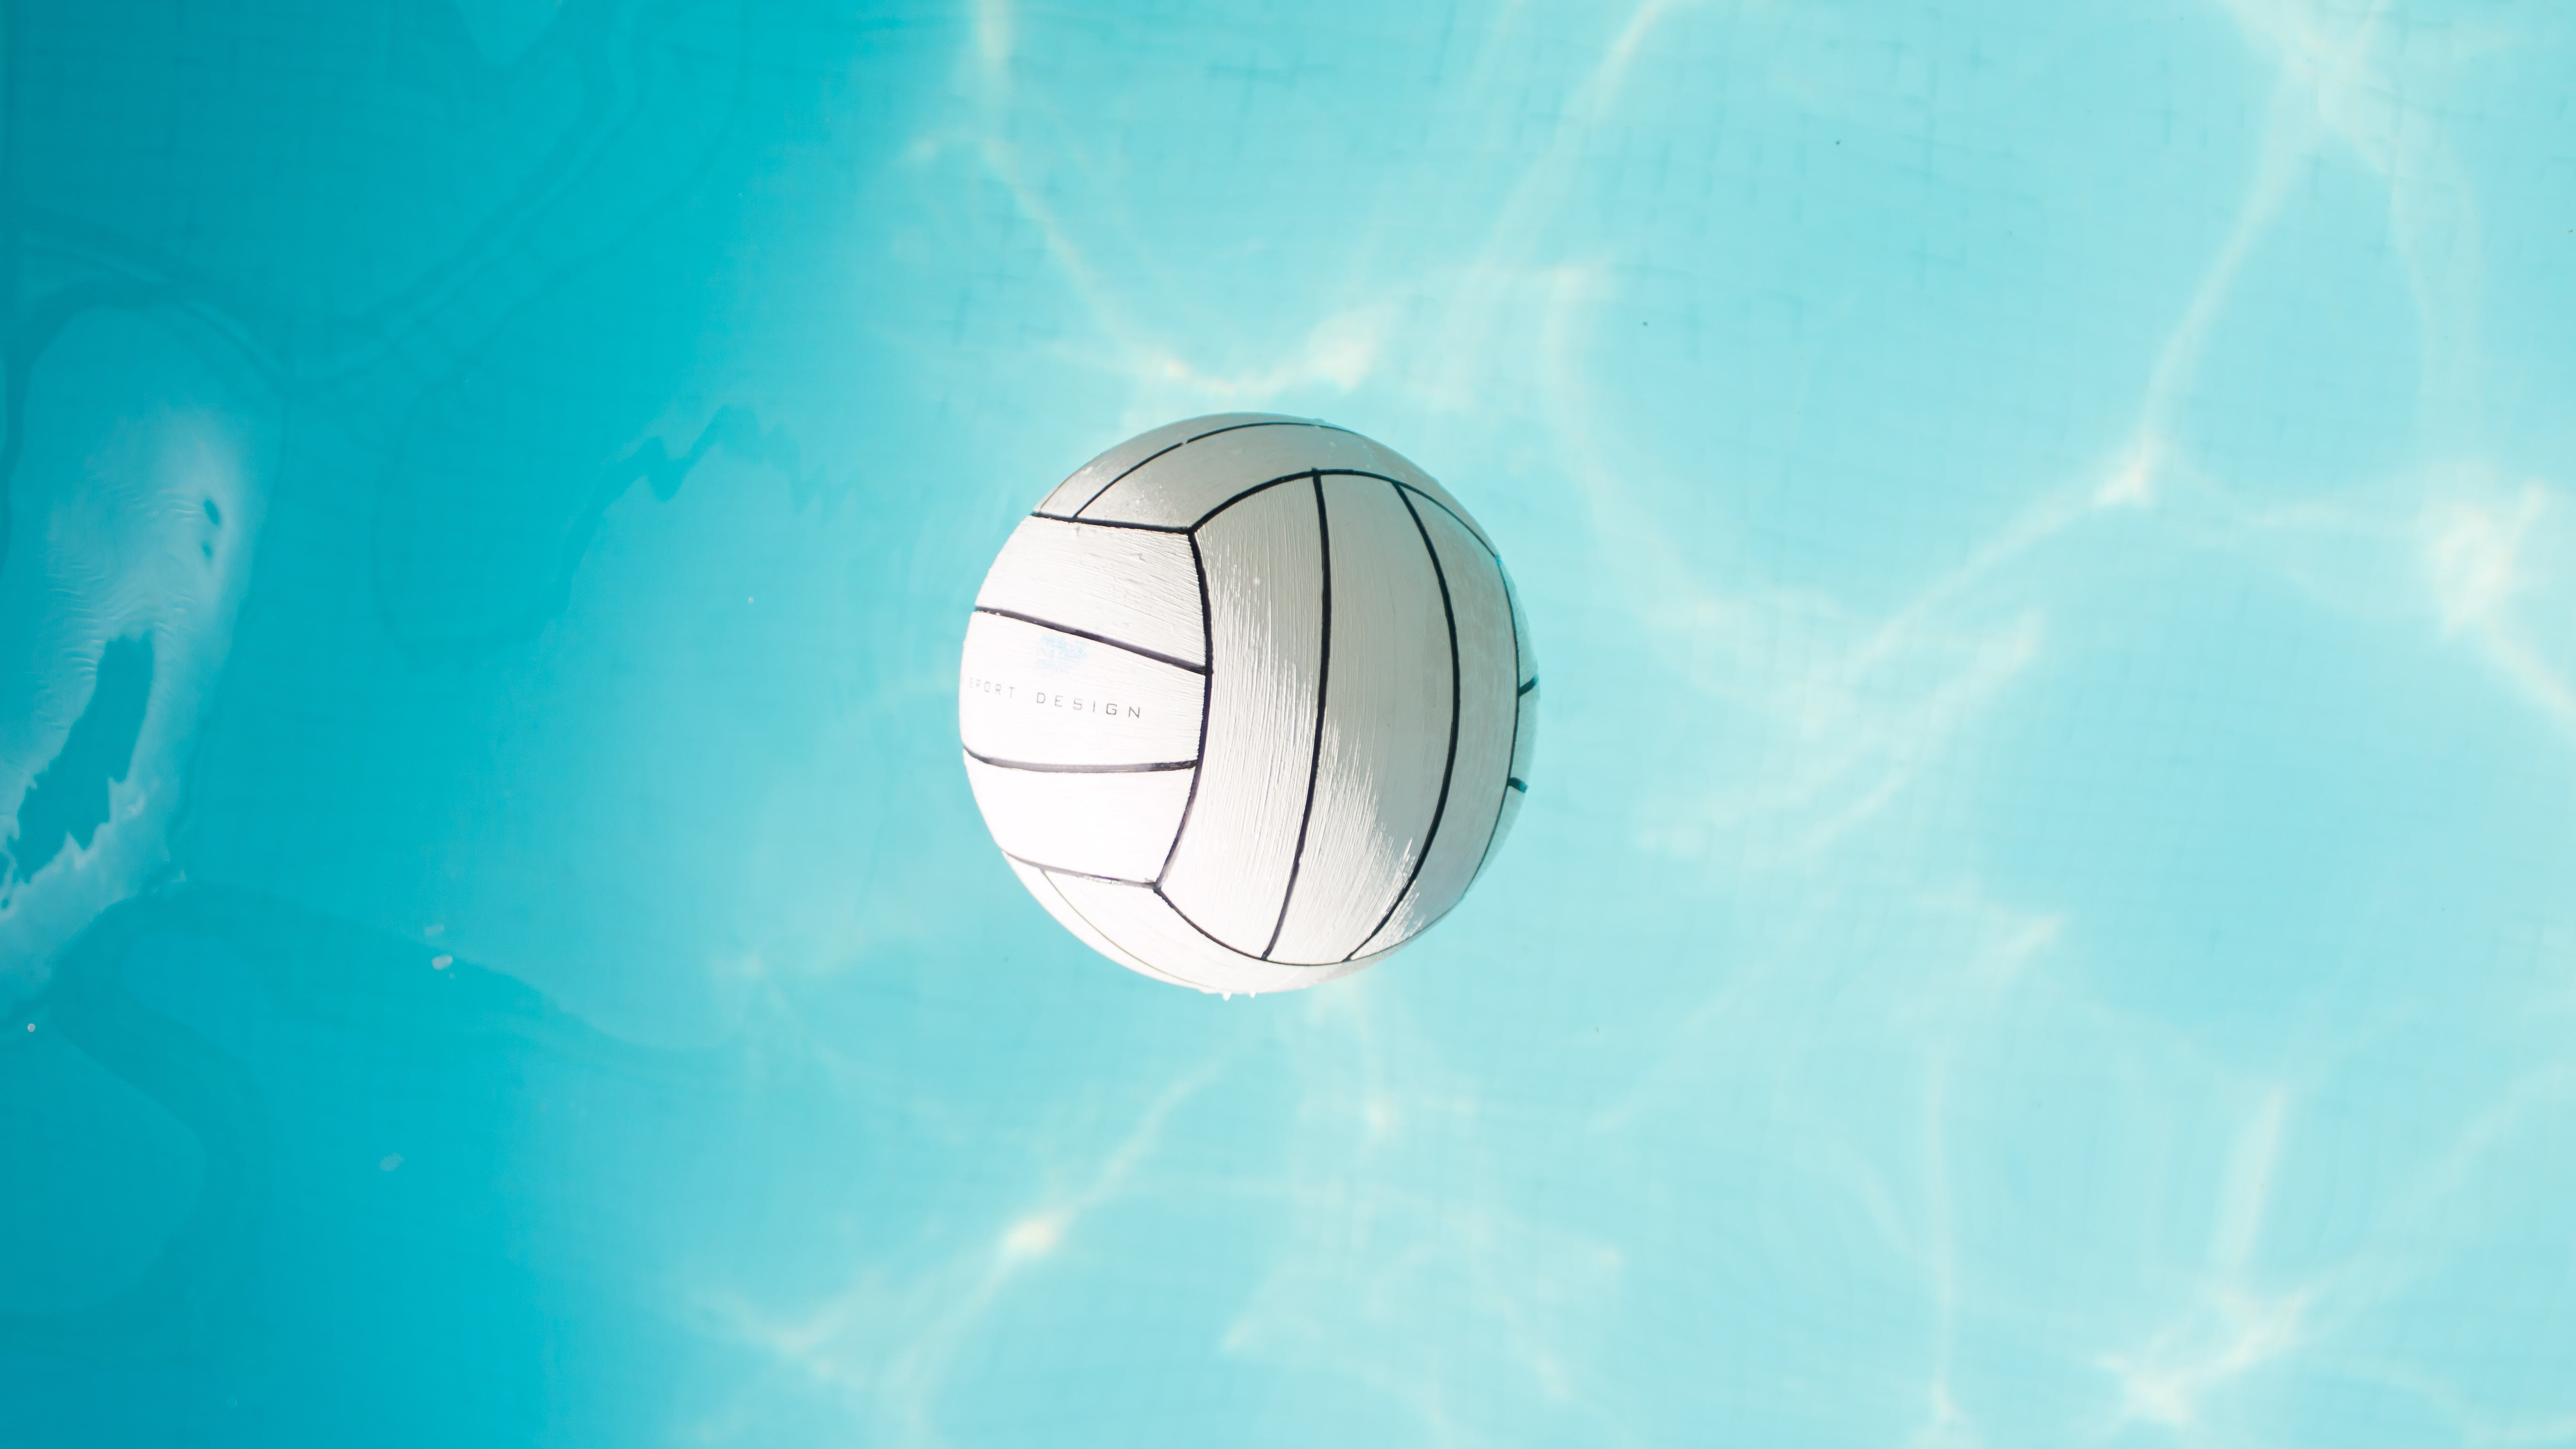 Volleyball Wallpaper For Laptop